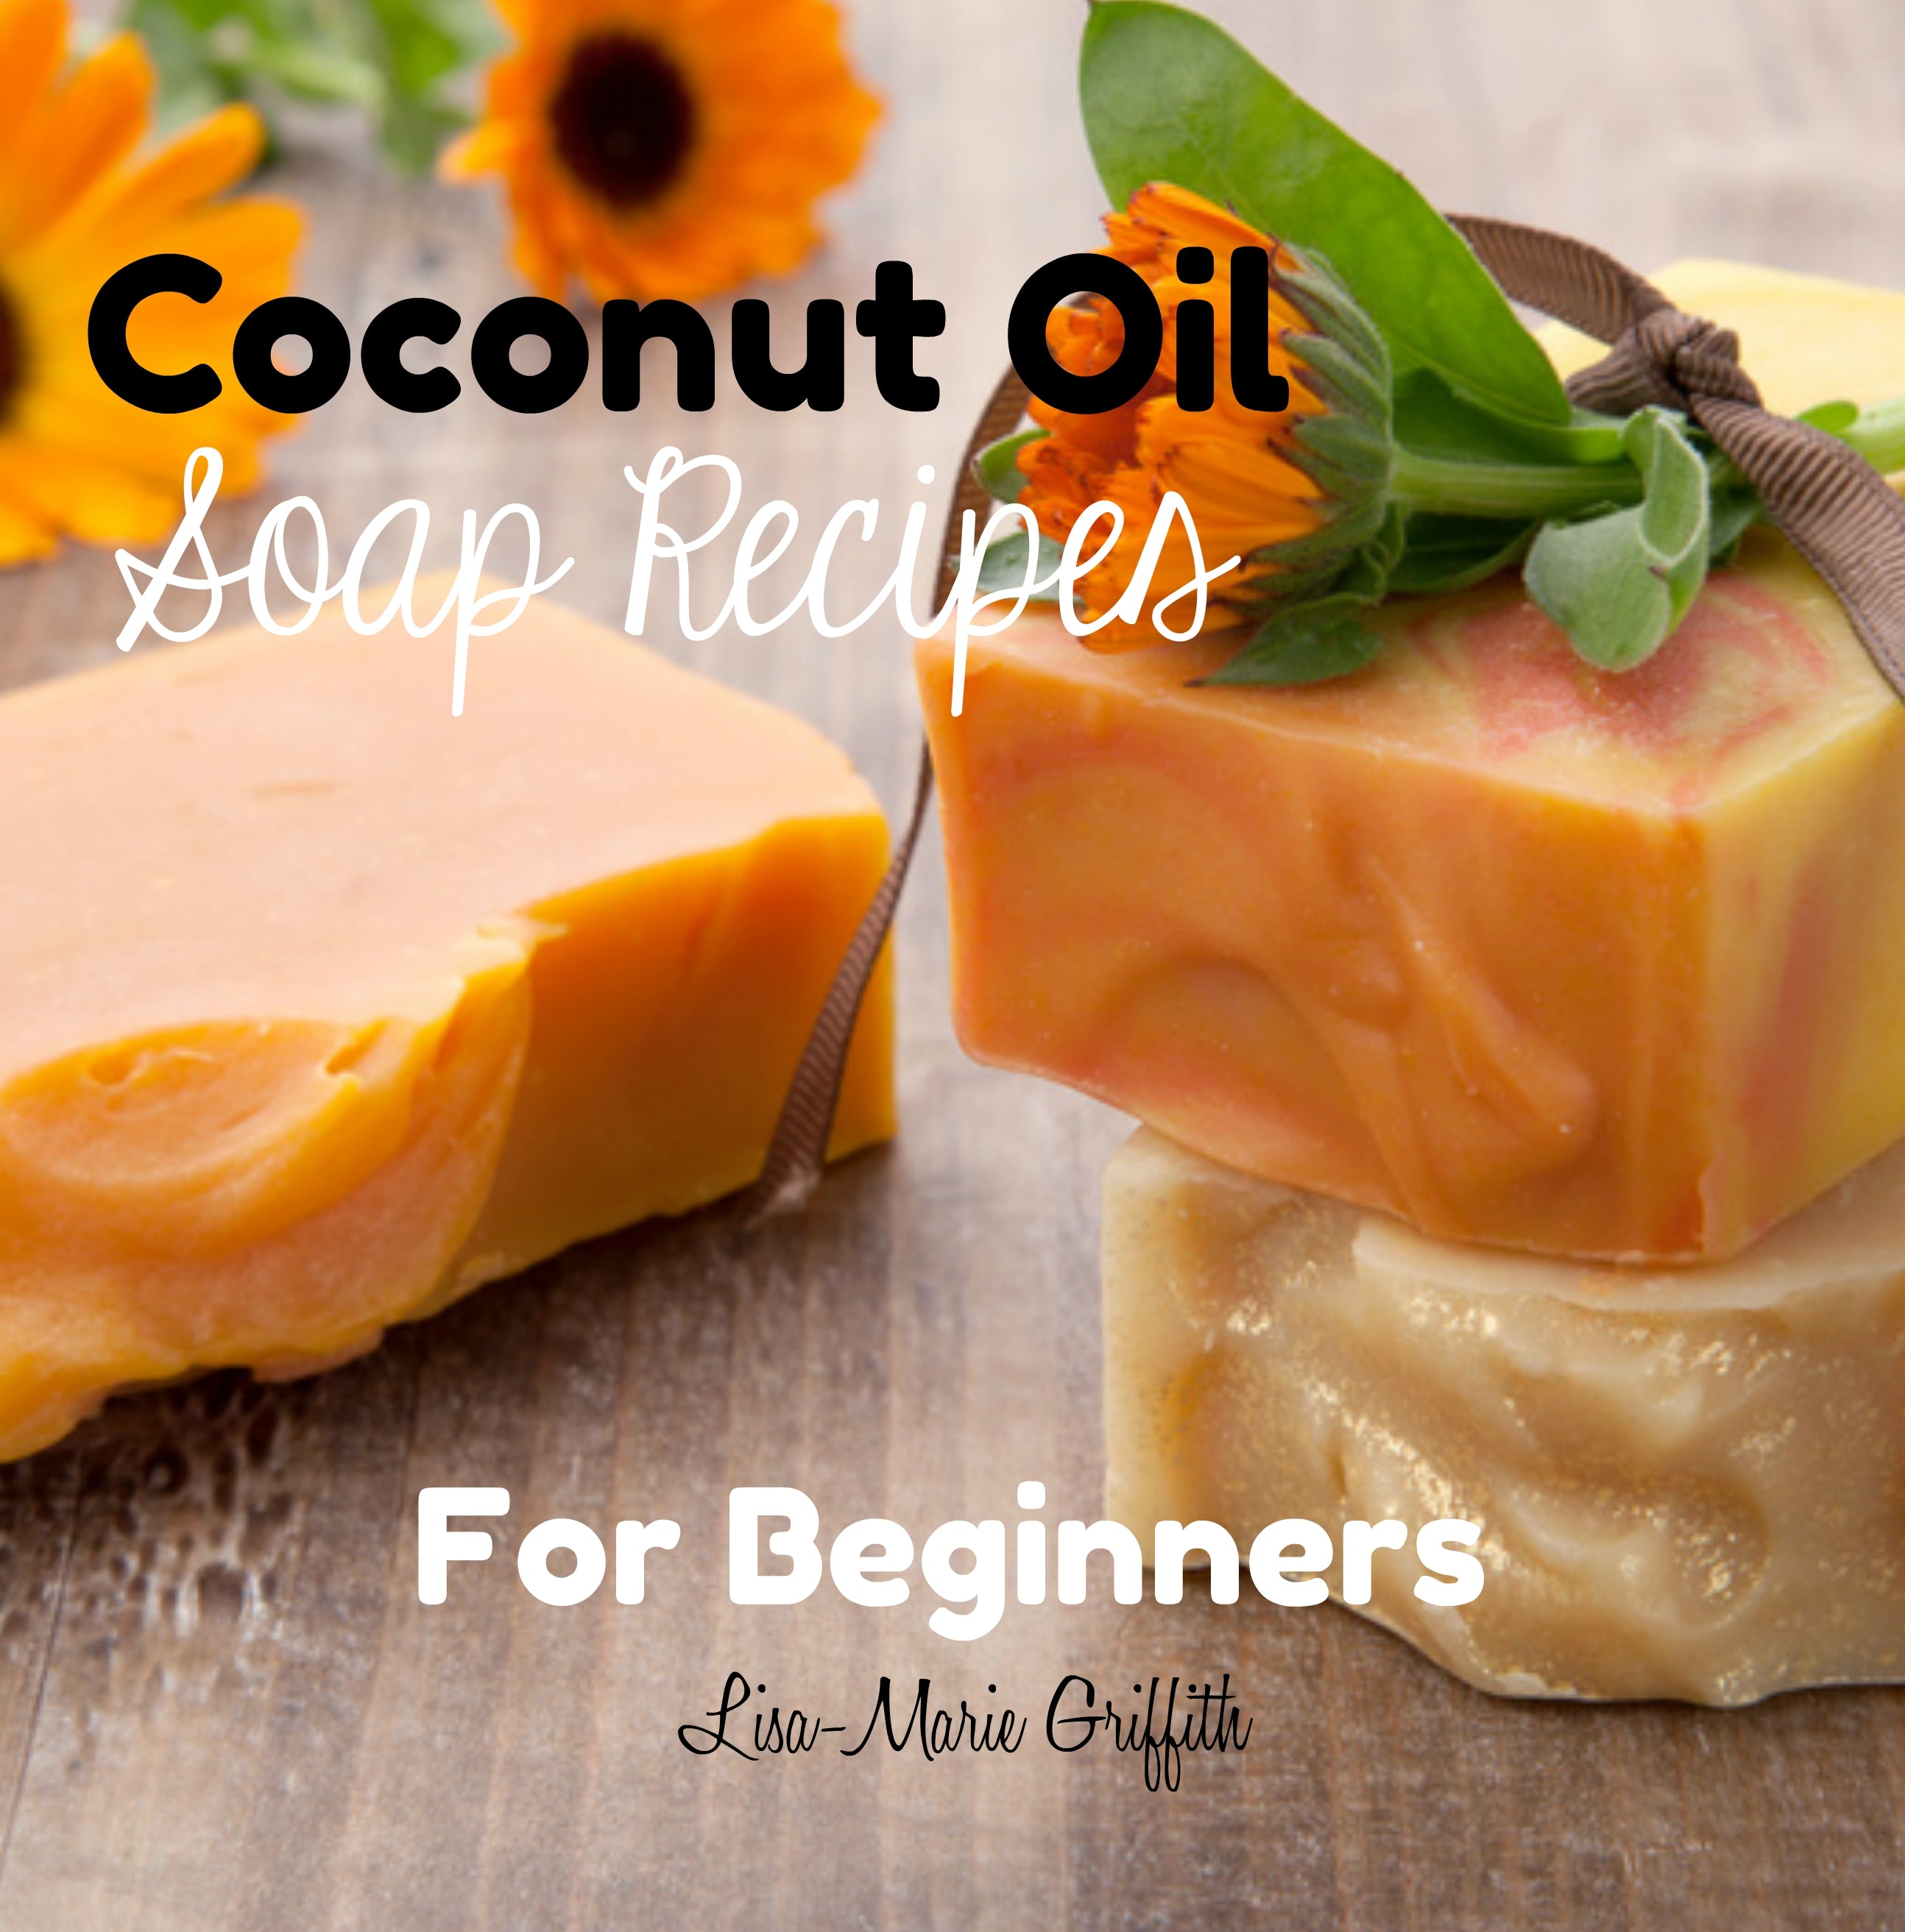 Coconut Oil Soap Recipes for Beginners-The Book – Scents of Tobago -->